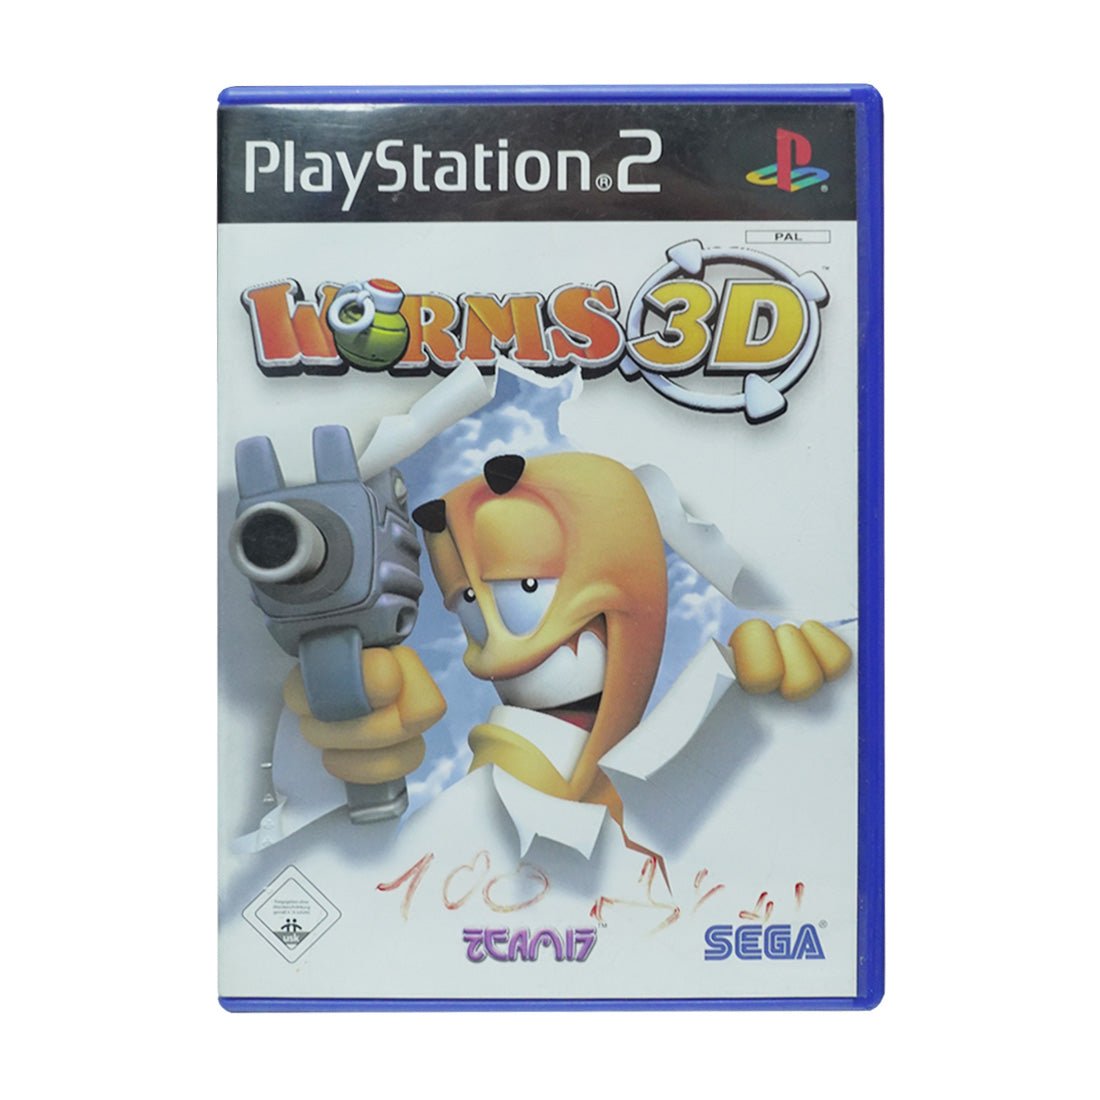 (Pre-Owned) Worms 3D - PlayStation 2 - ريترو - Store 974 | ستور ٩٧٤